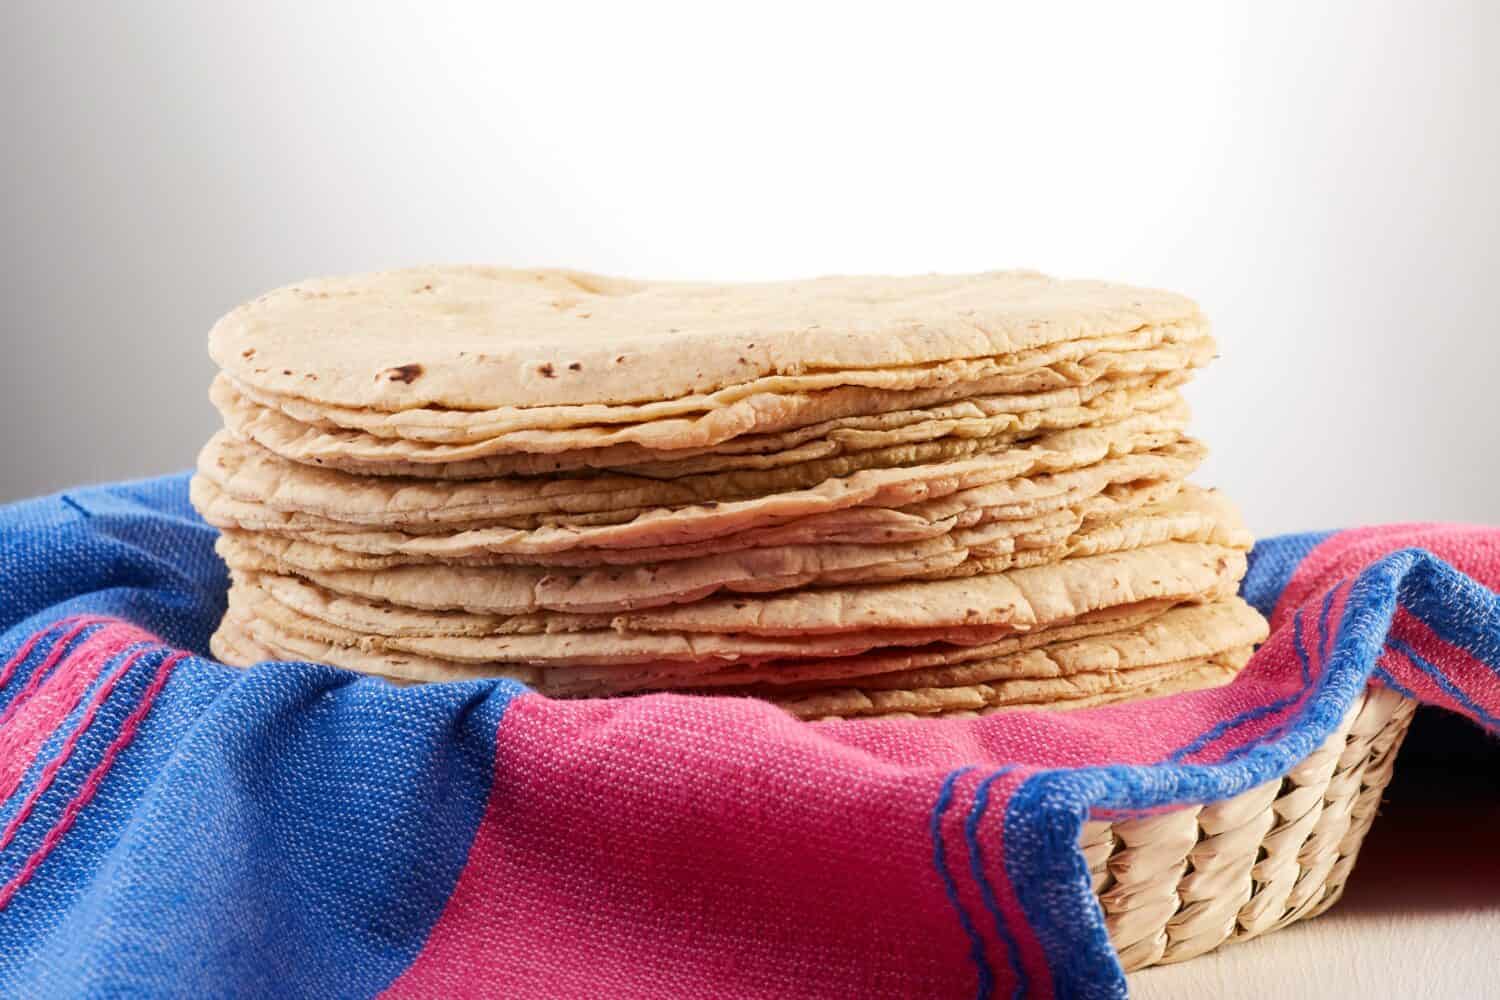 Pile of freshly made tortillas over a Mexican pink and blue cloth or napkin in a basket.